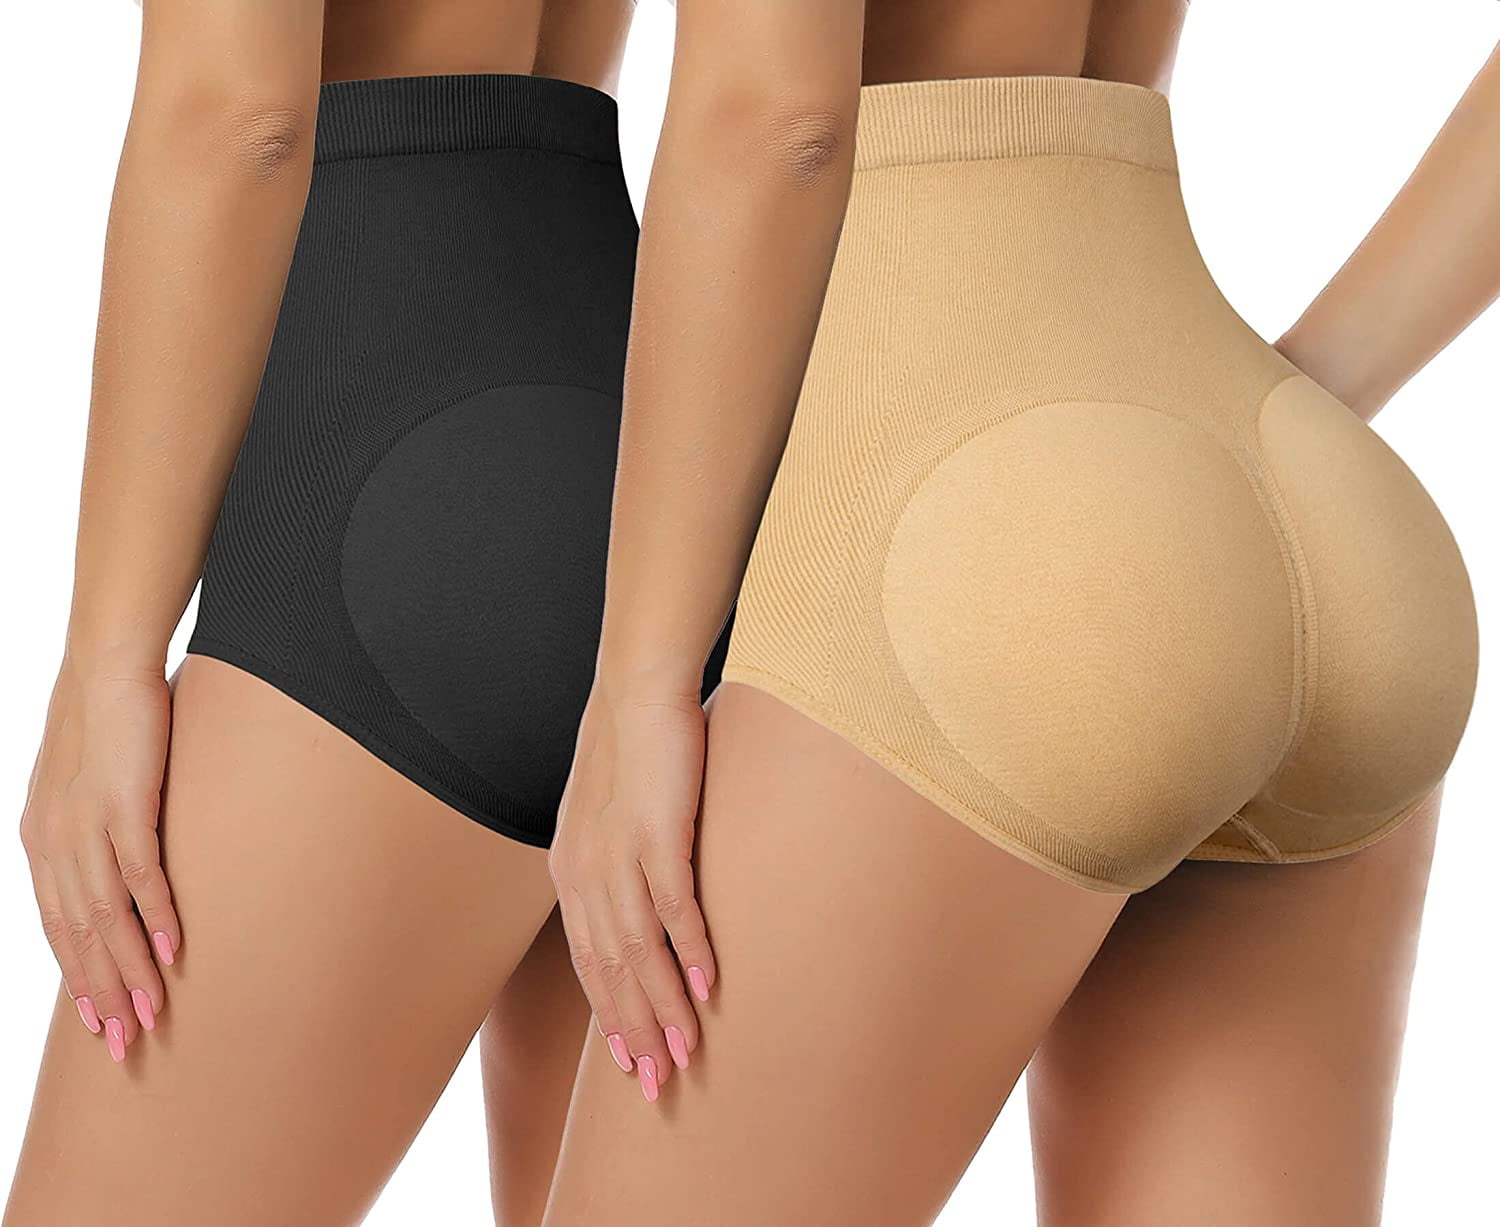 Womens Padded Butt Enhancer Panties With Buttock Up And Body Shaping  Features In OPP Bag From Allenwholesale, $1,472.09